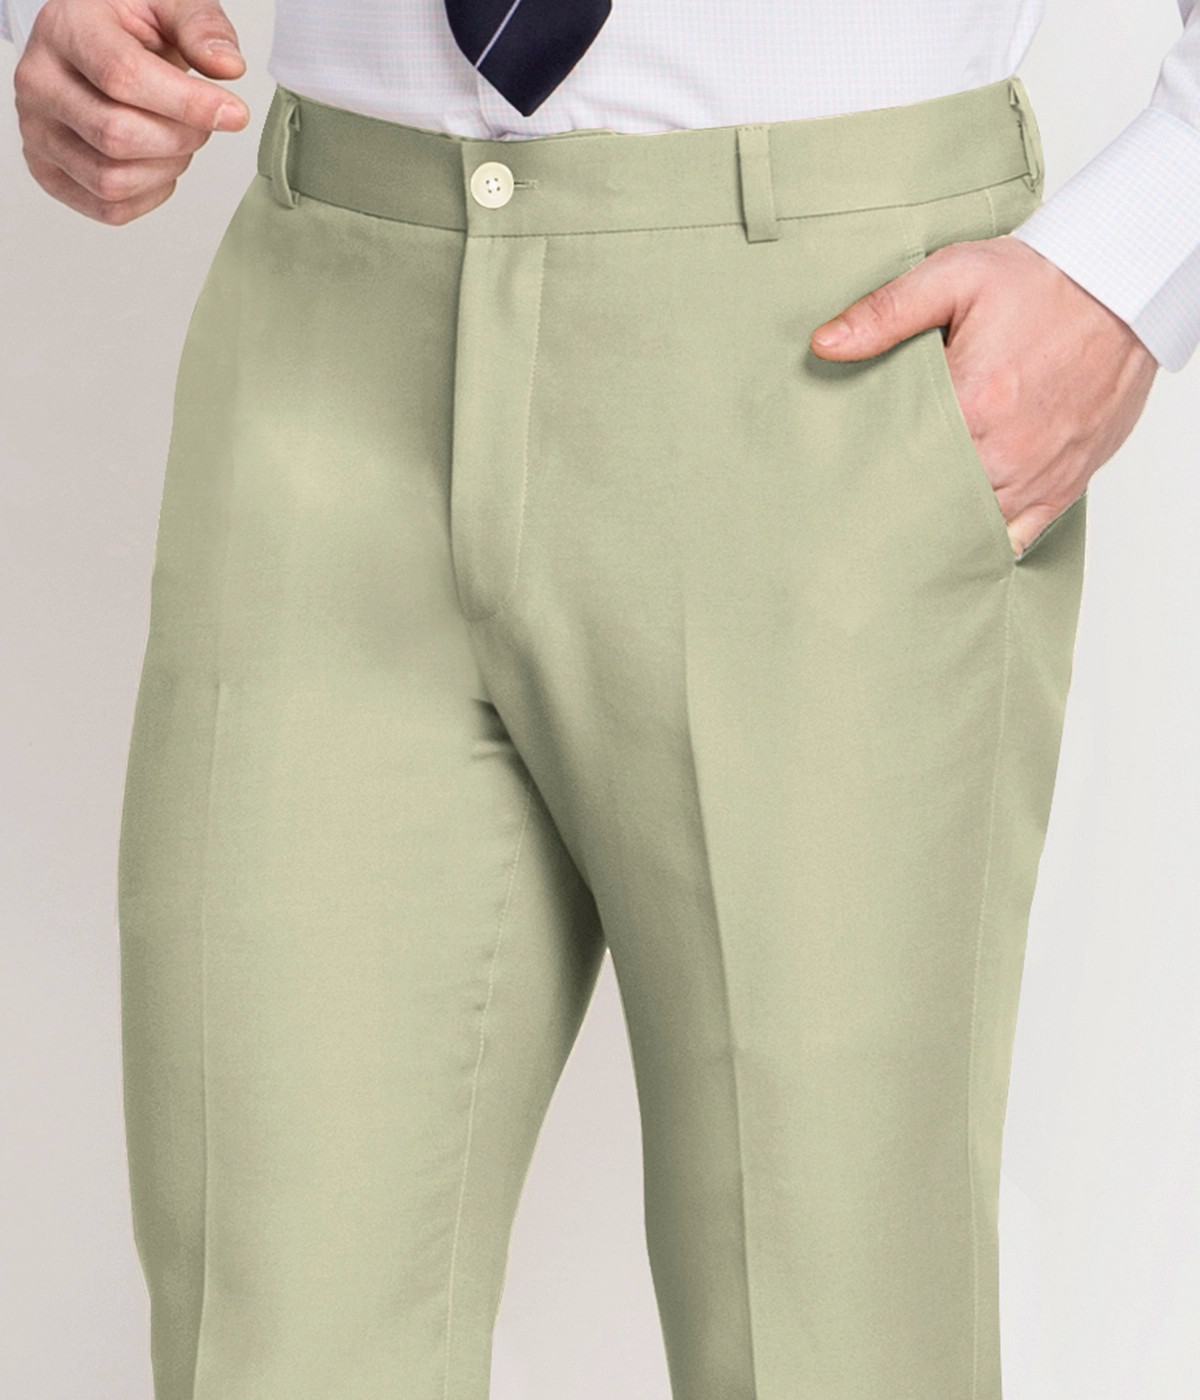 Buy Regular Fit Men Trousers Gray Poly Cotton Blend for Best Price,  Reviews, Free Shipping